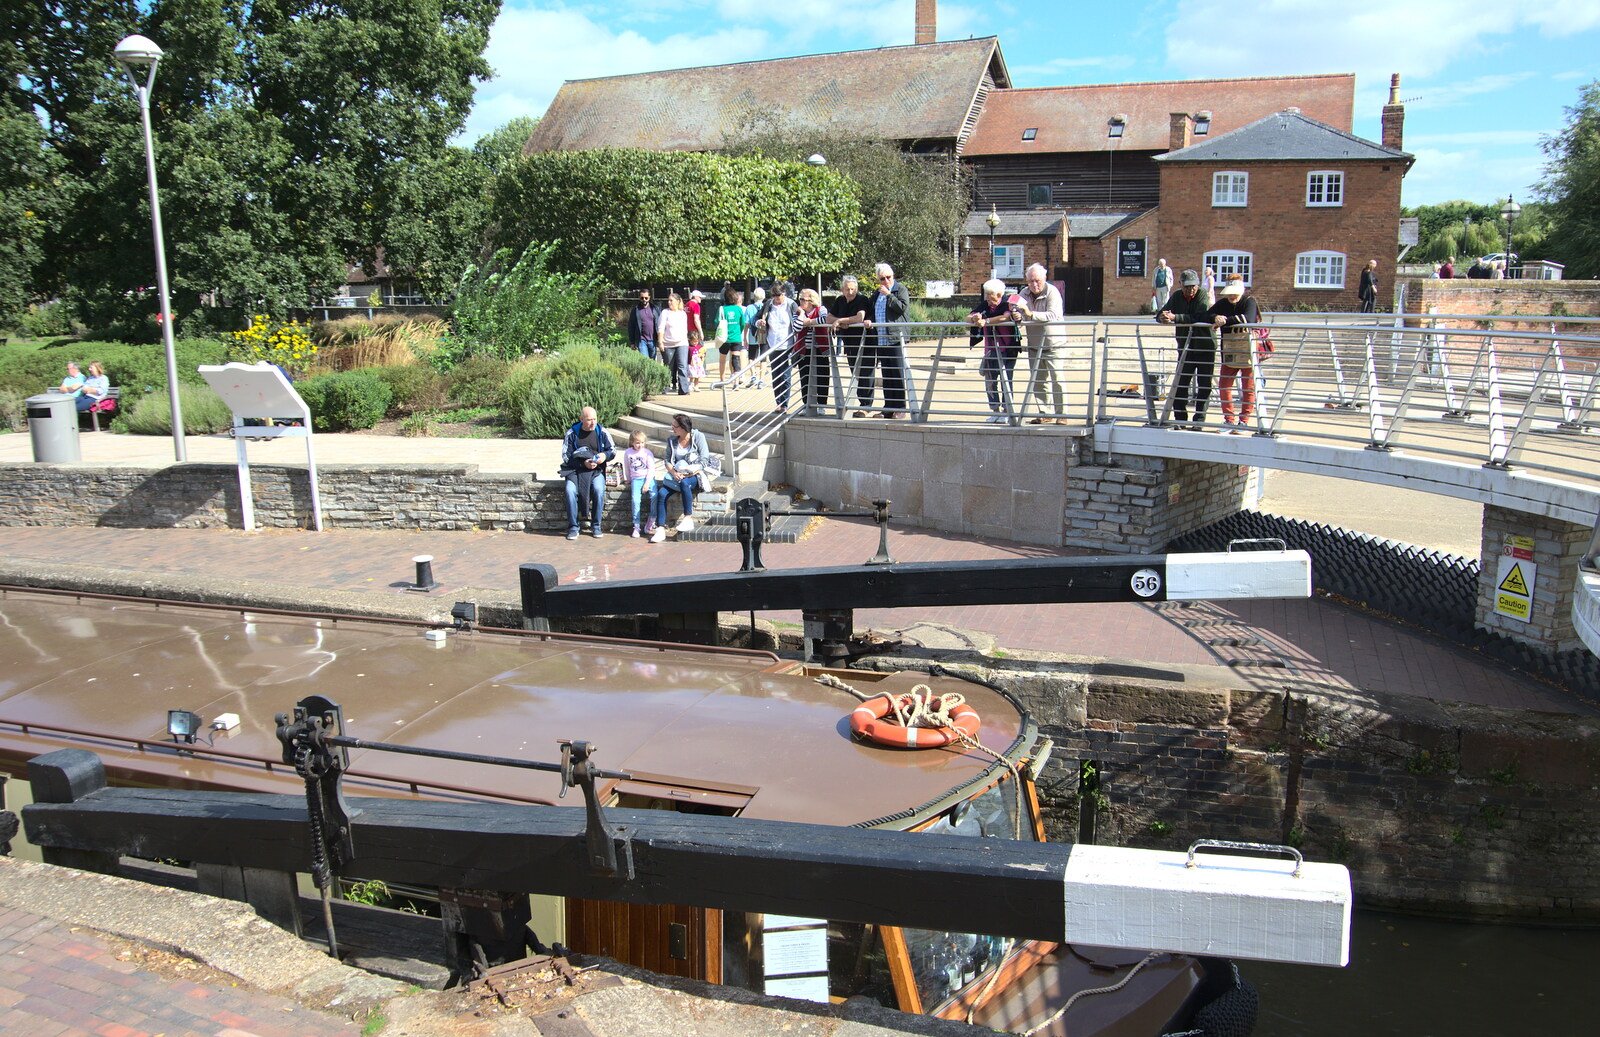 The lock gates at the river entry from A Postcard from Stratford-upon-Avon, Warwickshire - 9th September 2018